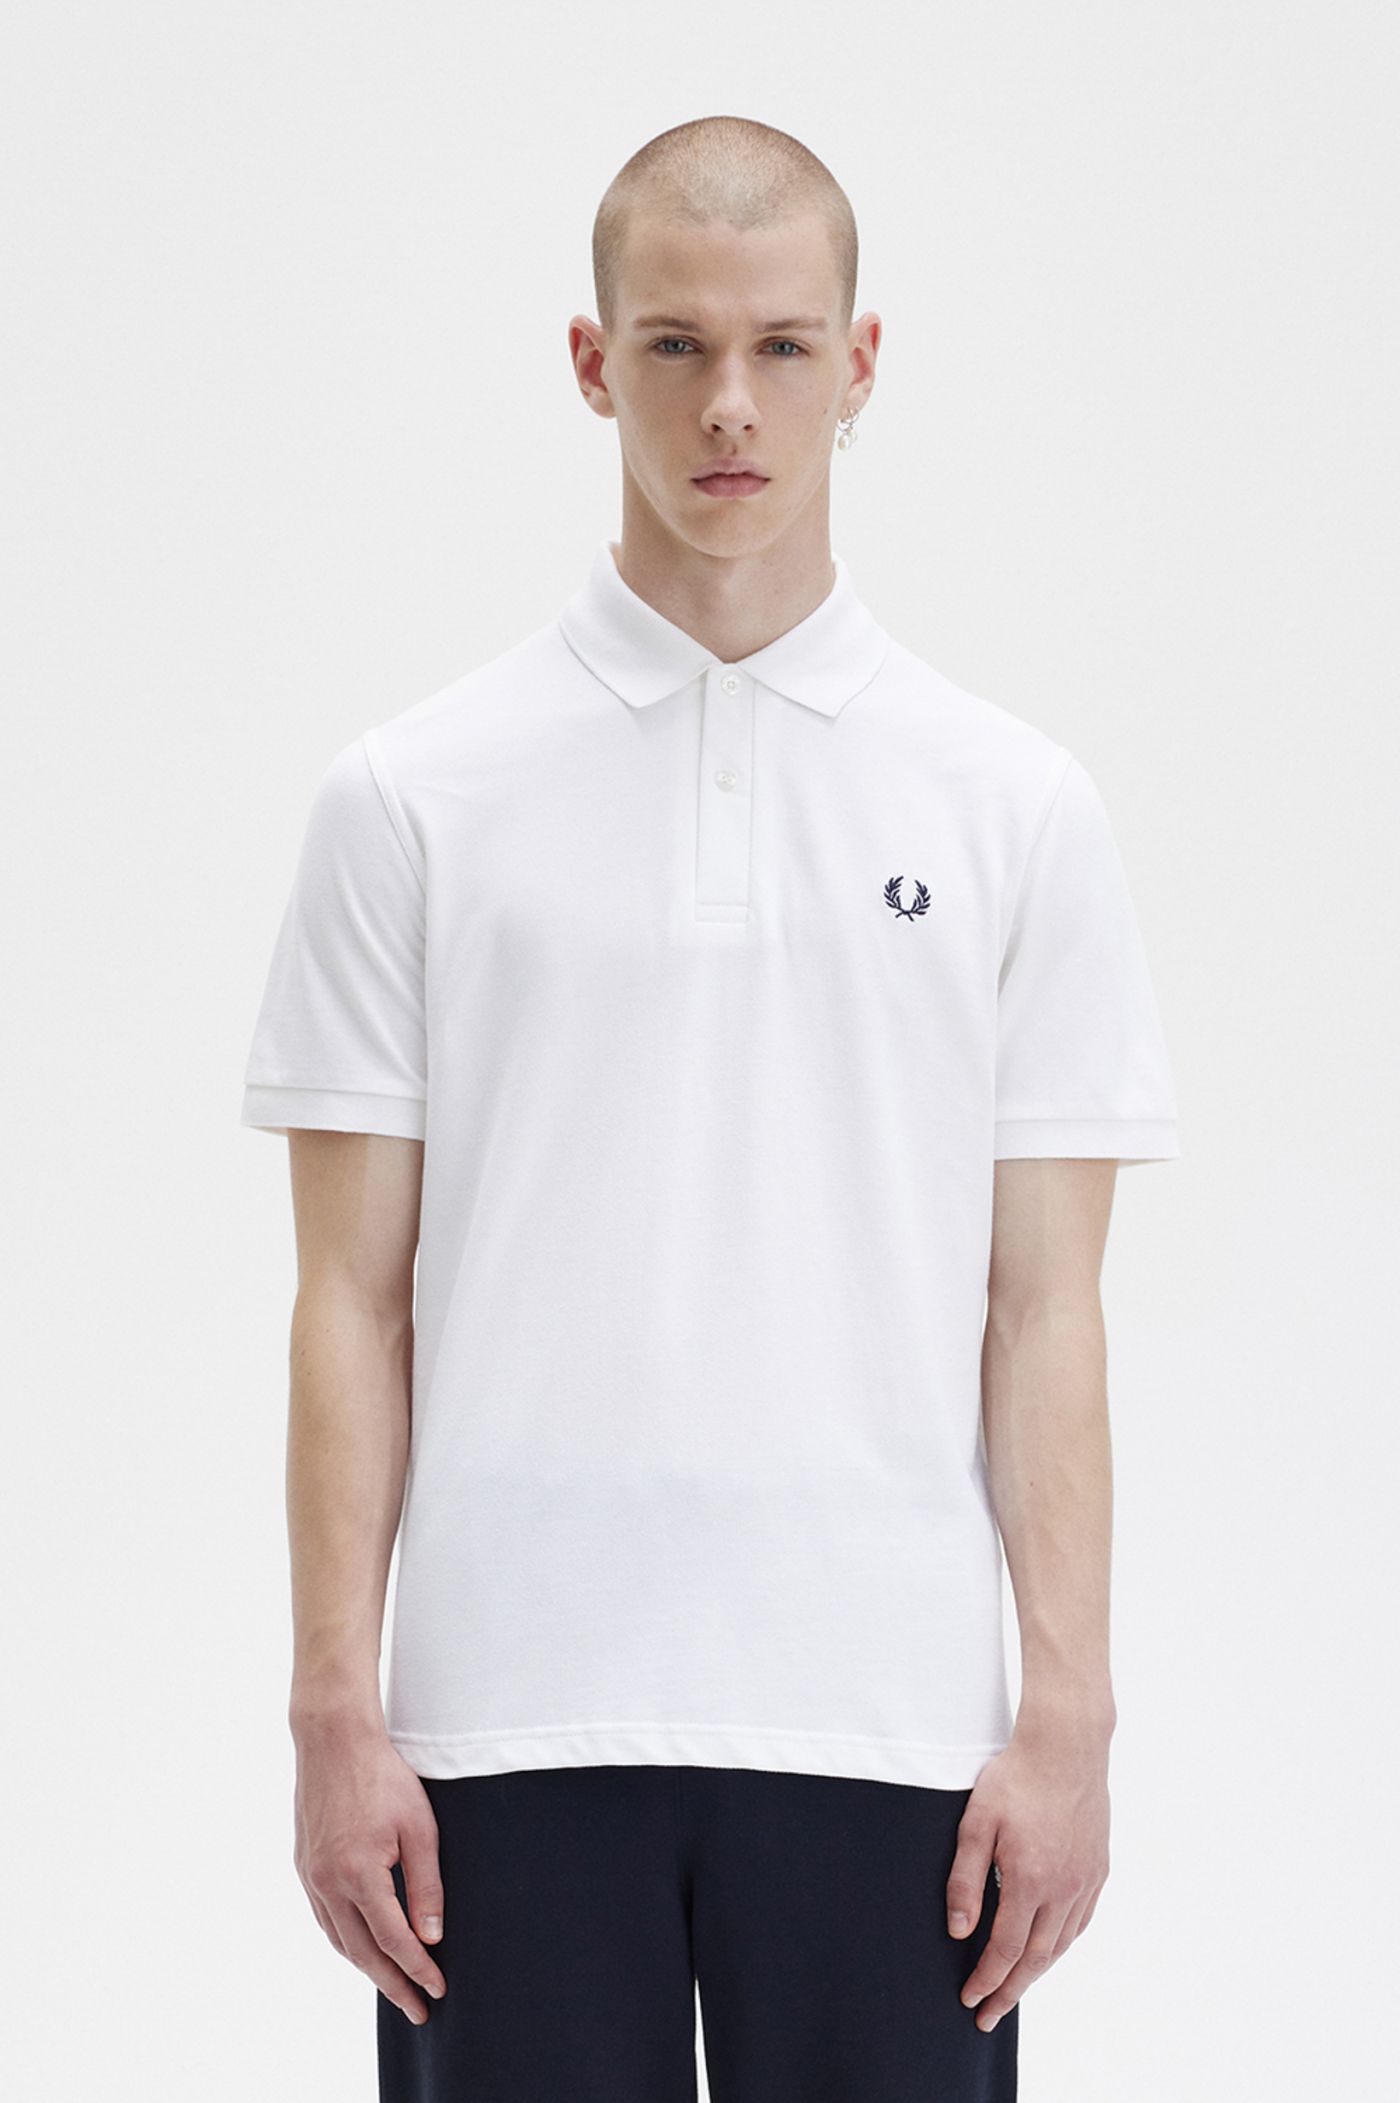 M3 - White / Navy | The Fred Perry Shirt | Men's Short & Long Sleeve ...